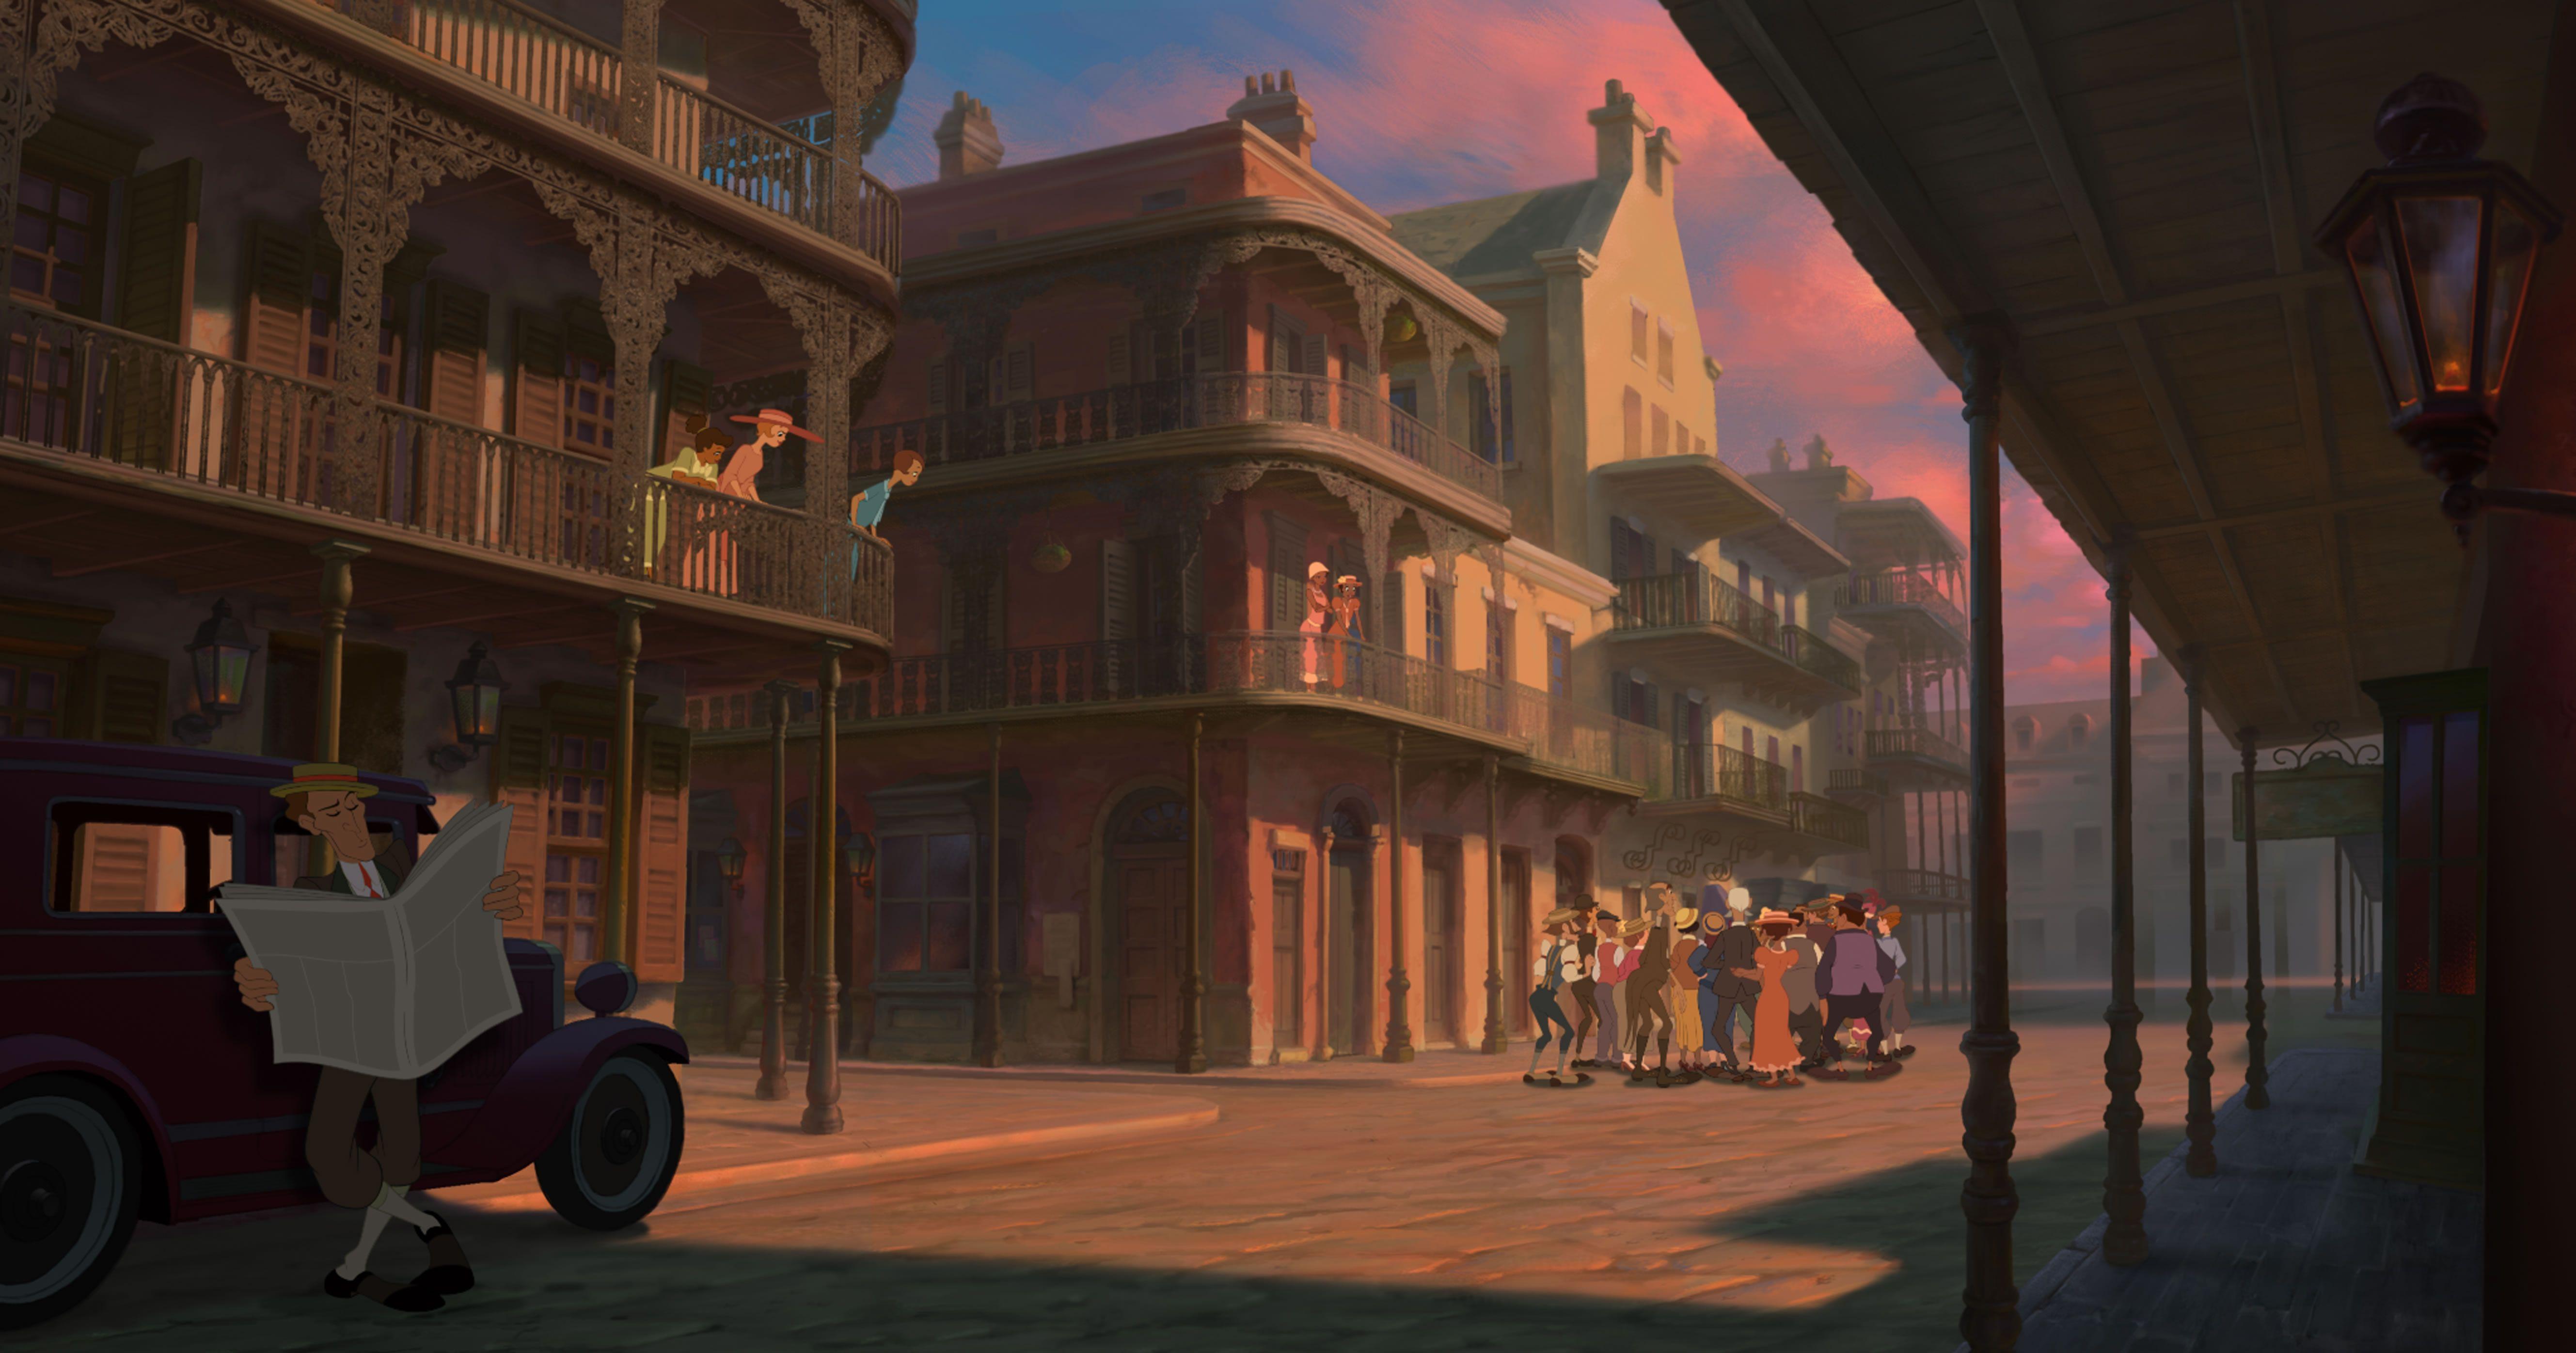 French Quarter from Disney's Princess and the Frog Desktop Wallpaper